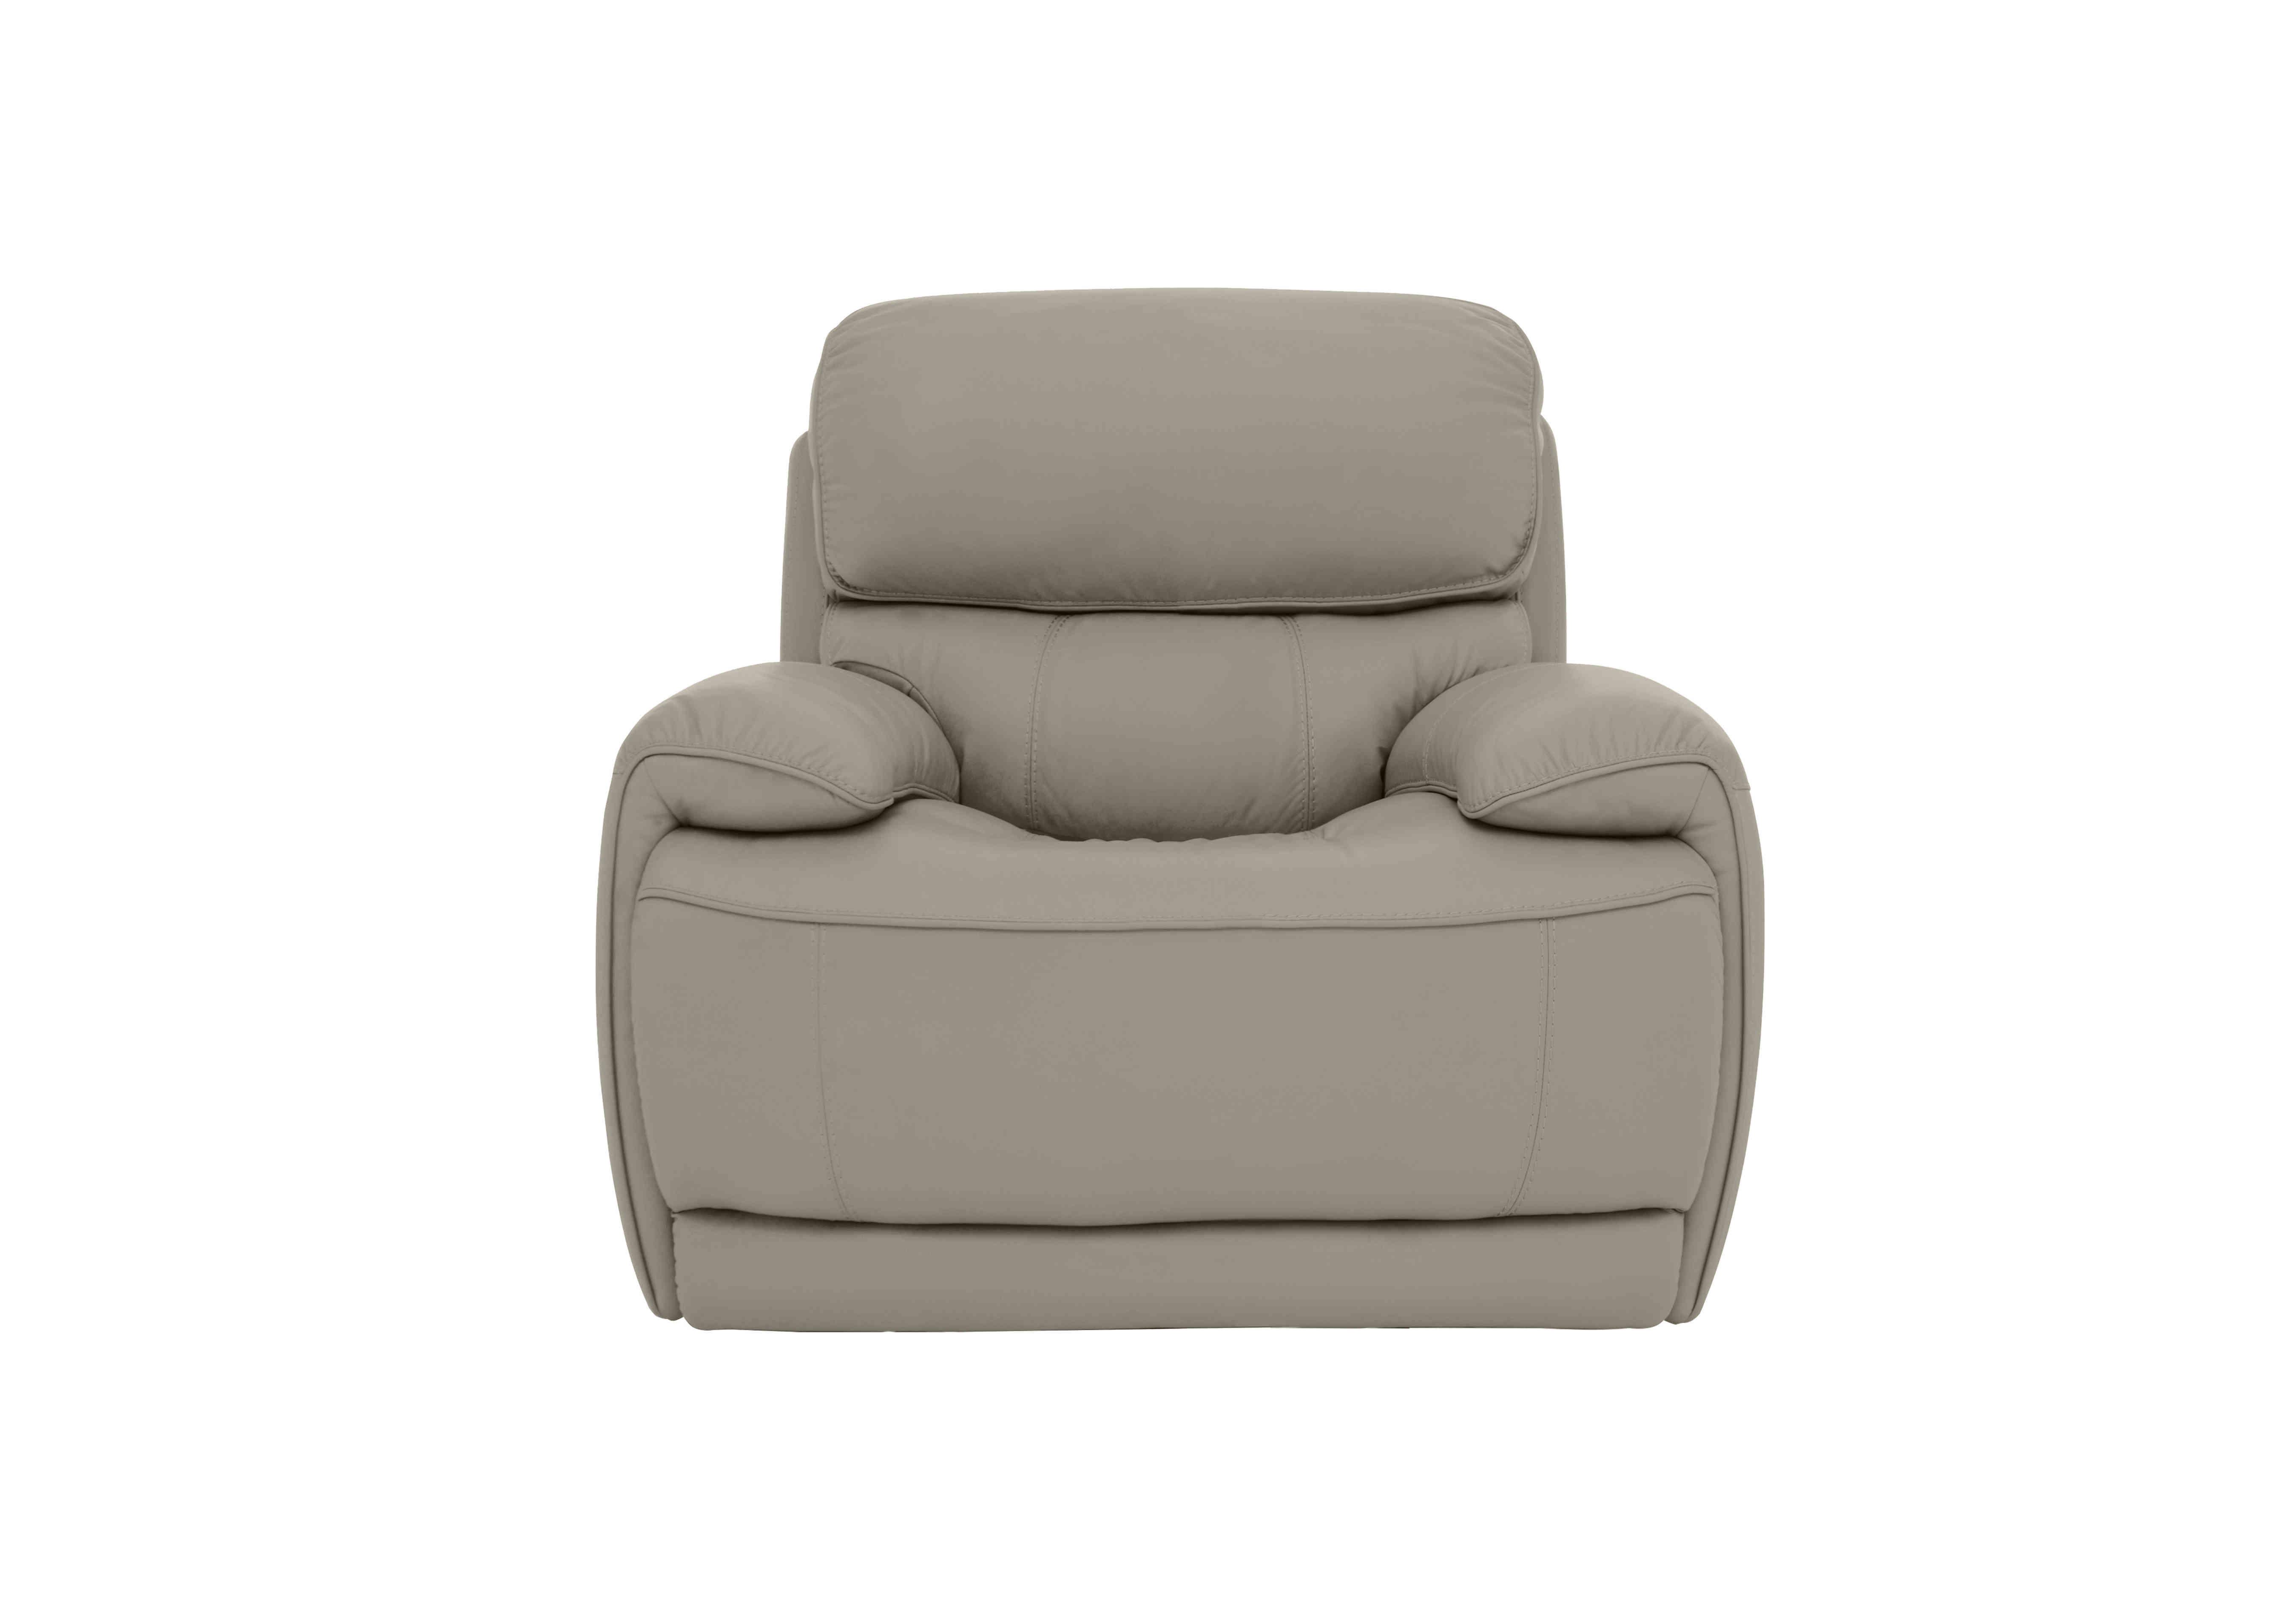 Rocco Leather Power Rocker Armchair with Power Headrests in Bv-946b Silver Grey on Furniture Village